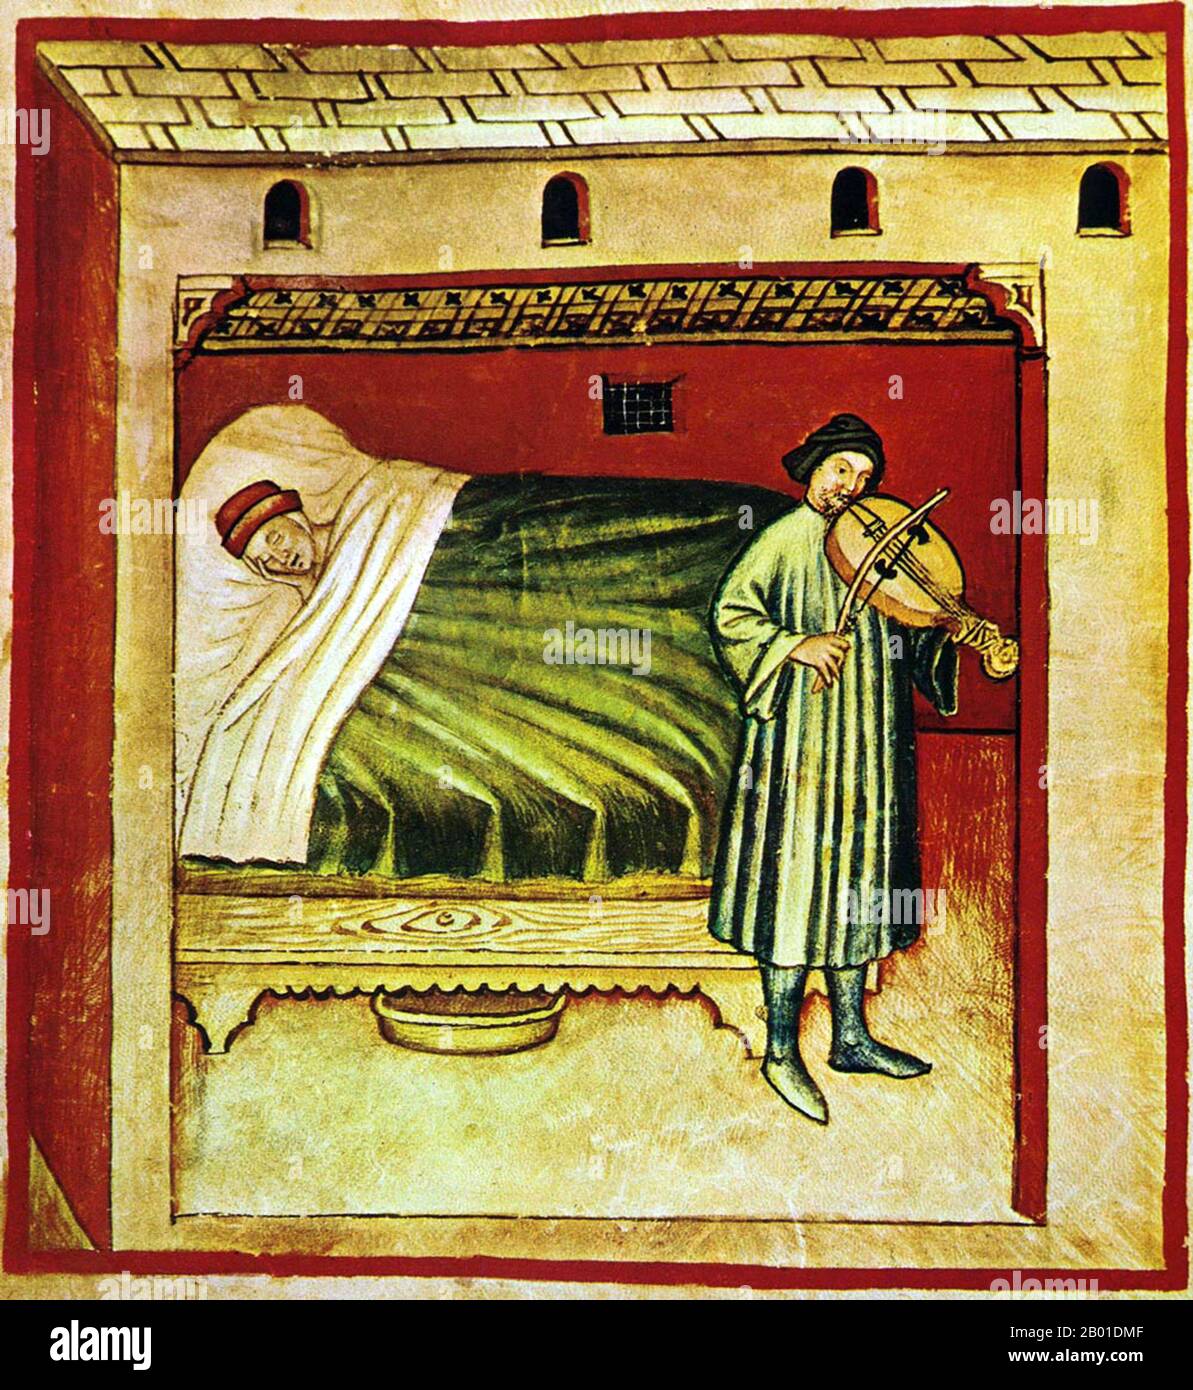 Iraq/Italy: Music as an aid in insomnia. Illustration from Ibn Butlan's Taqwim al-sihha or 'Maintenance of Health', published in Italy as the Tacuinum Sanitatis, 14th century.  The Tacuinum (sometimes Taccuinum) Sanitatis is a medieval handbook on health and wellbeing, based on the Taqwim al‑sihha, an eleventh-century Arab medical treatise by Ibn Butlan of Baghdad.  Ibn Butlân was a Christian physician born in Baghdad and who died in 1068.  He set forth six elements necessary to maintain daily health. Stock Photo